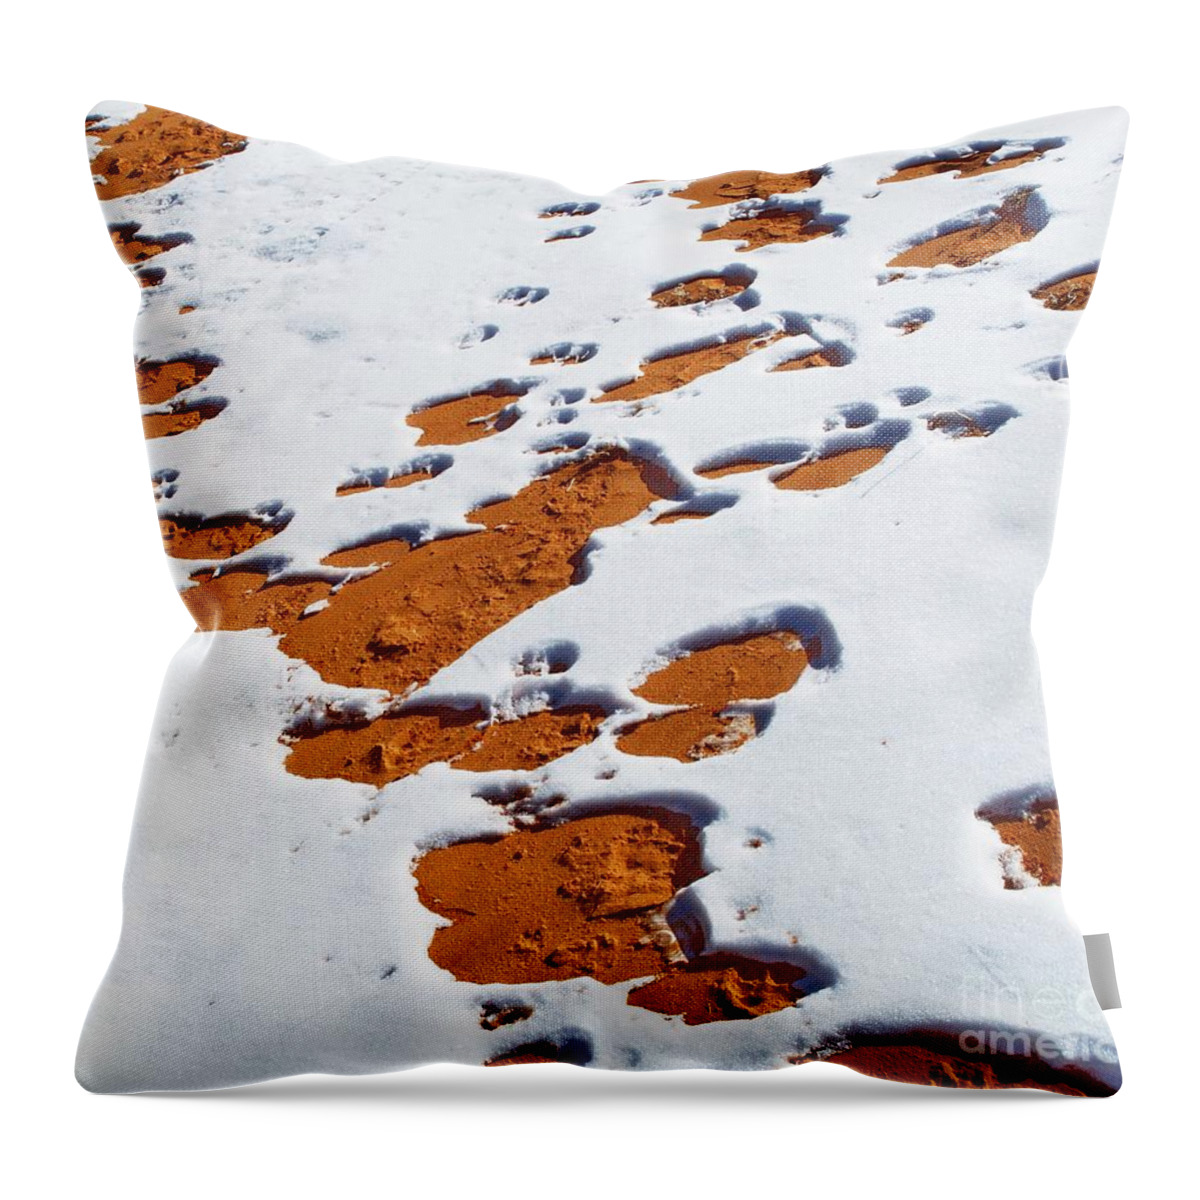 Landscape Throw Pillow featuring the digital art Snow on Dunes by Tim Richards